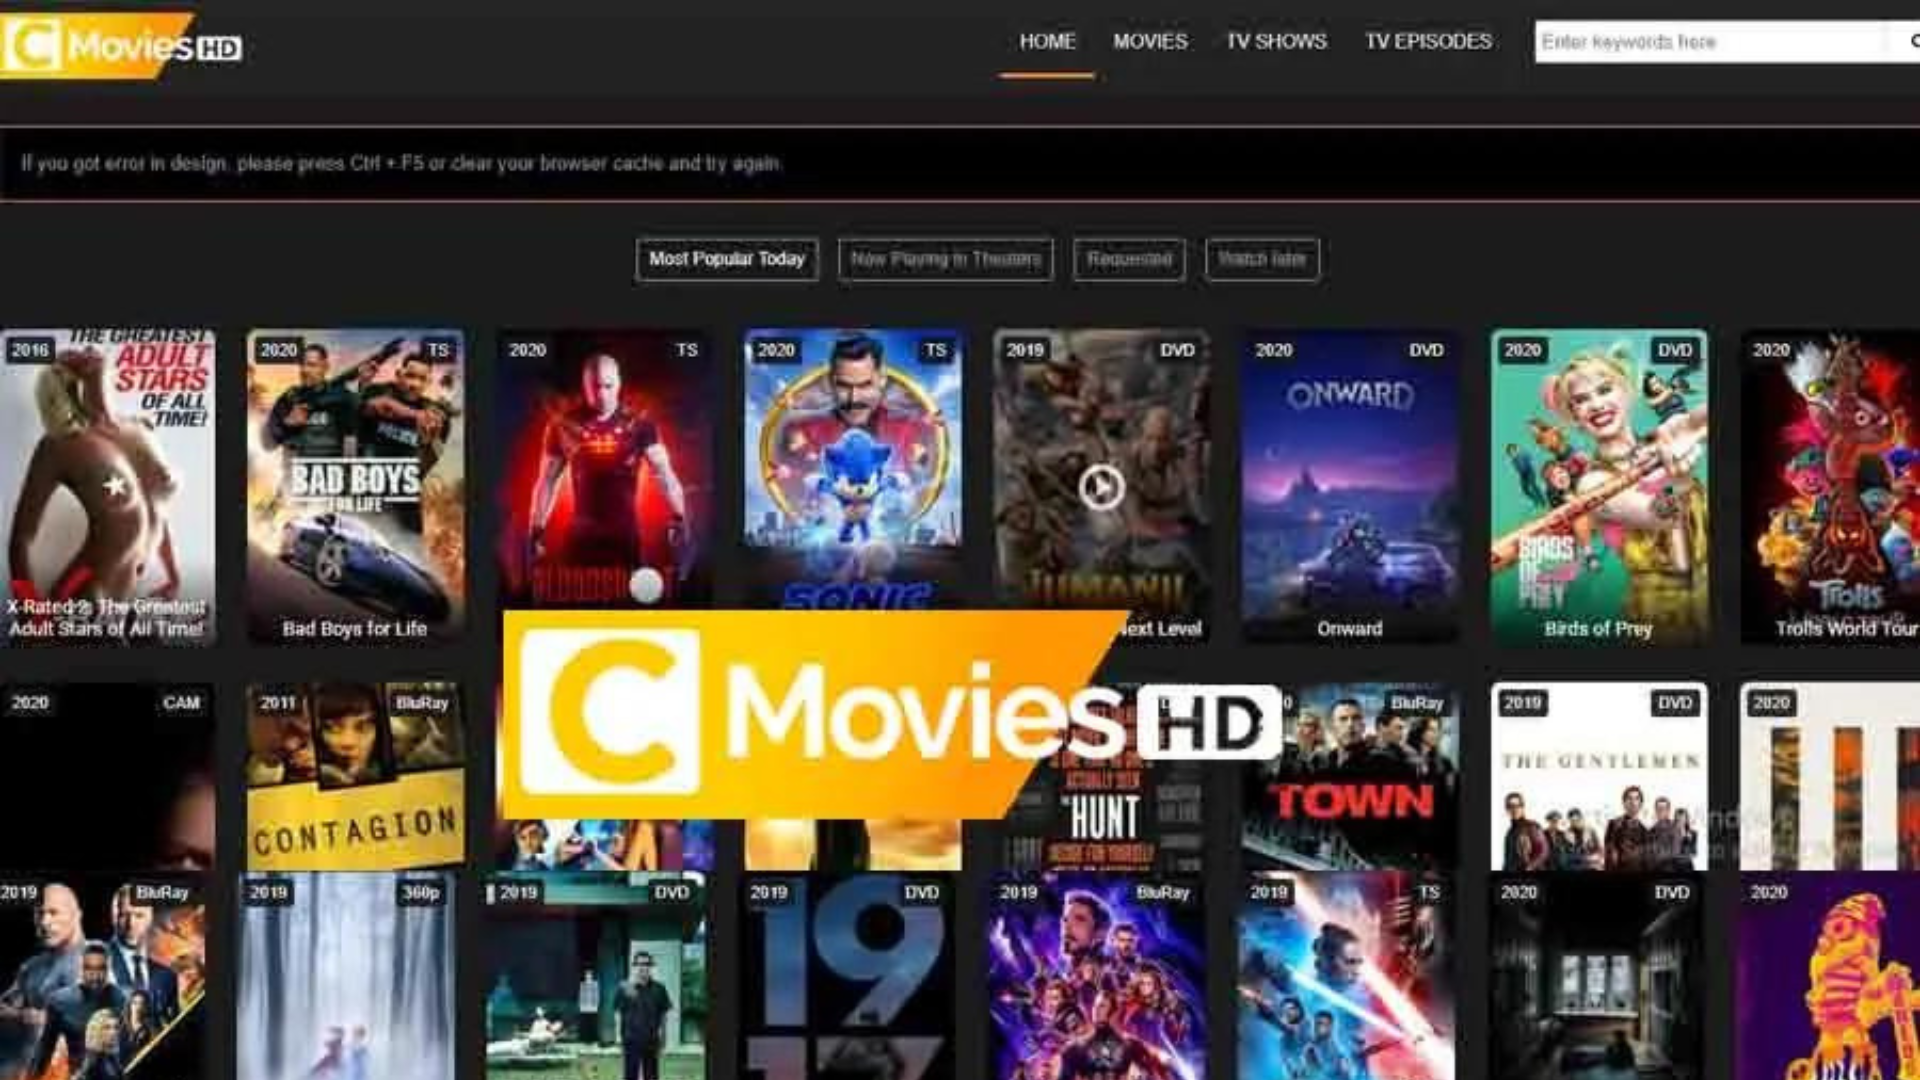 C Movies webpage with various movie covers with search button on upper right corner